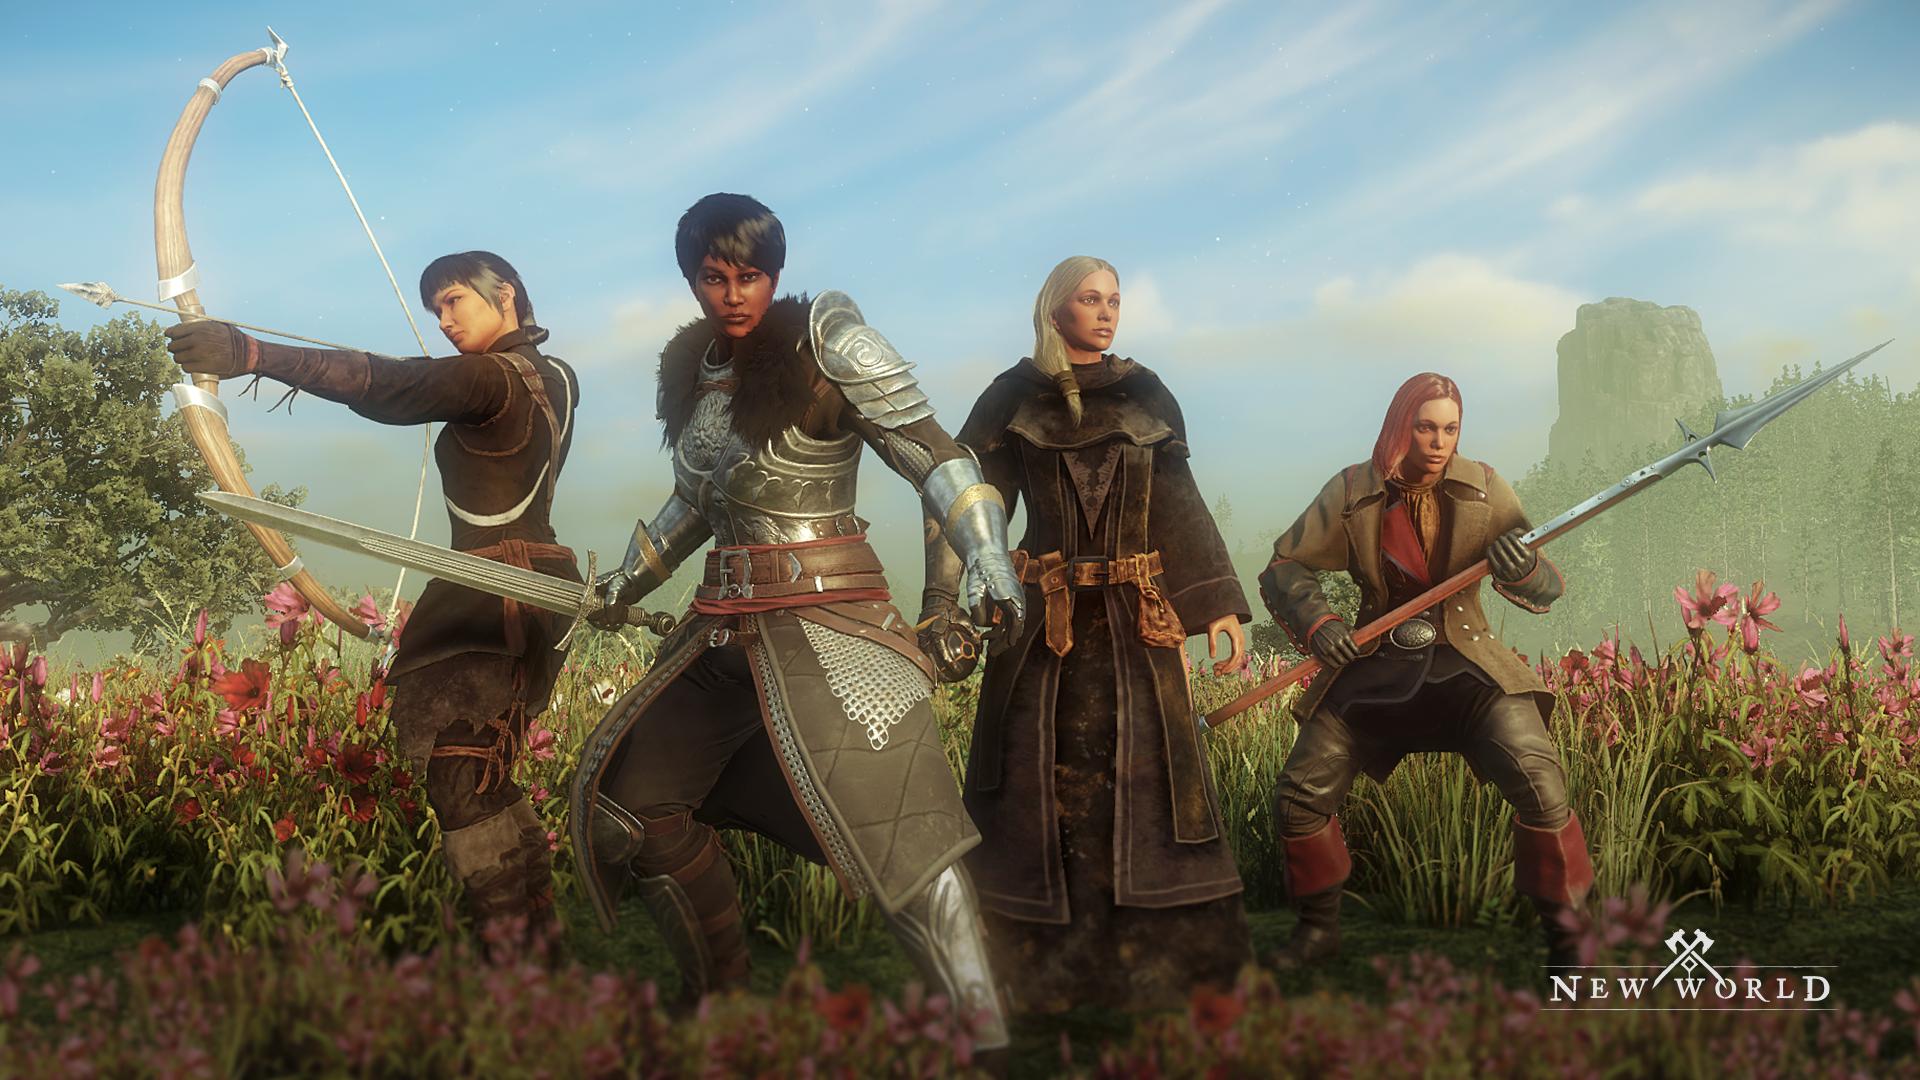 Fate Awaits in Amazon's MMO New World